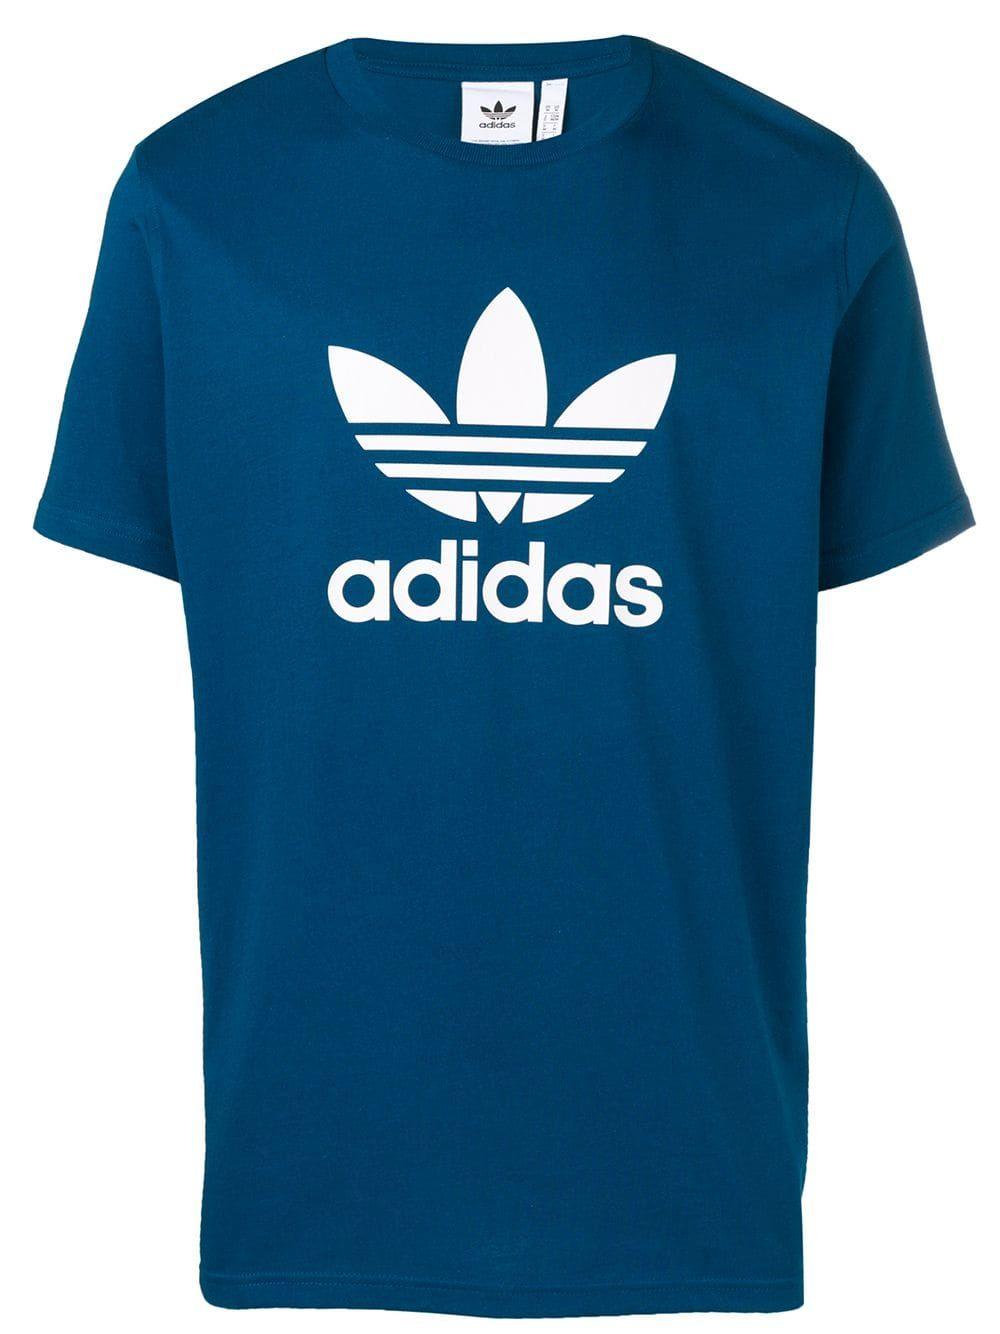 adidas Blue Cotton T-shirt in Blue for Men - Lyst